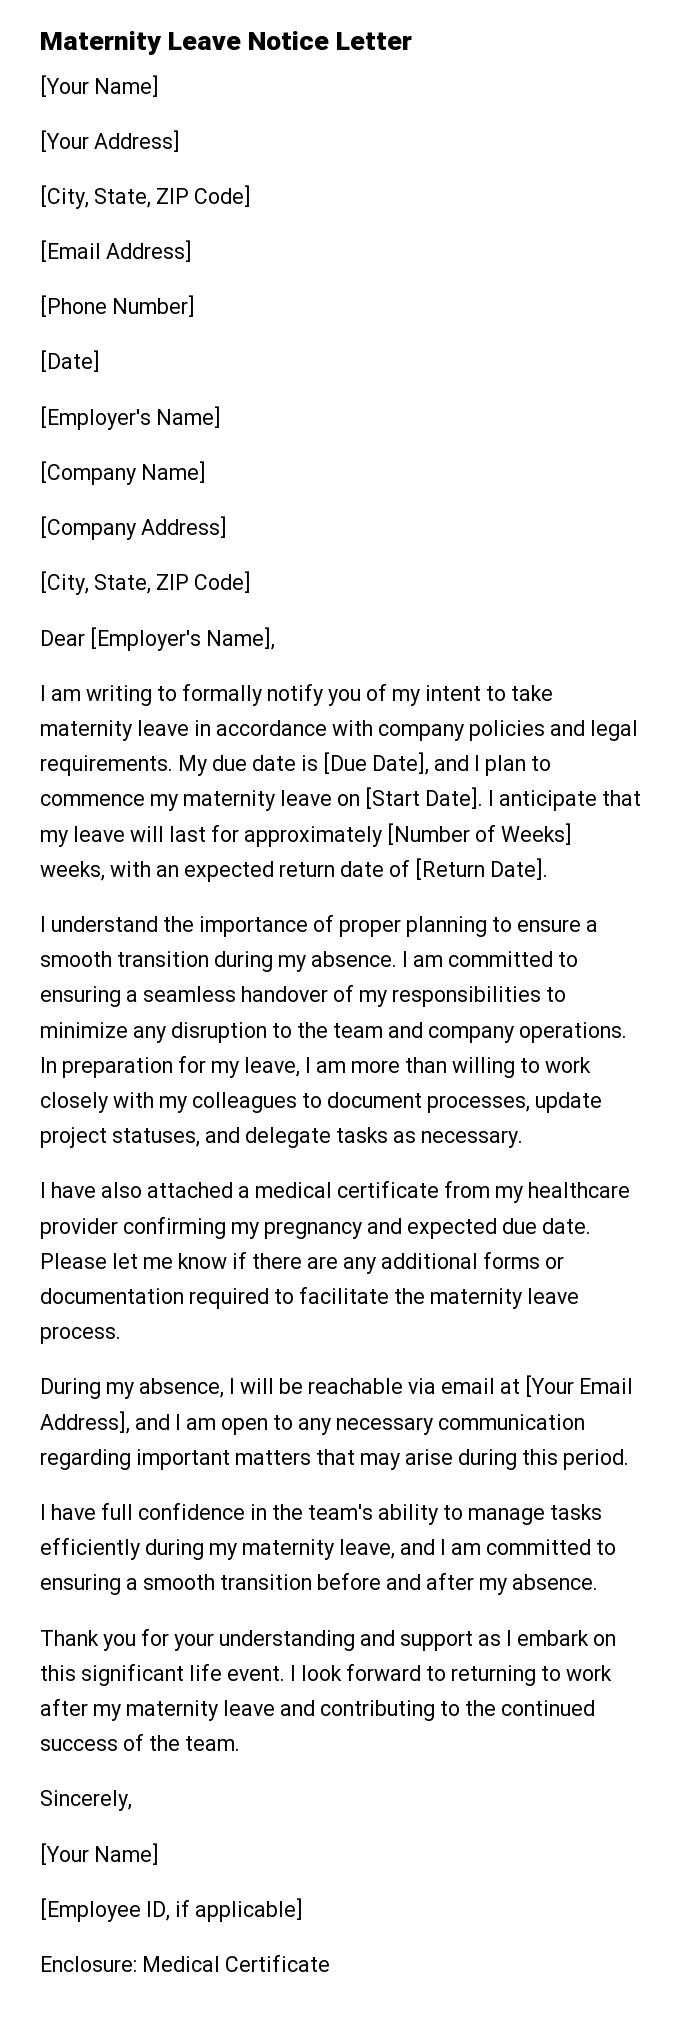 Maternity Leave Notice Letter